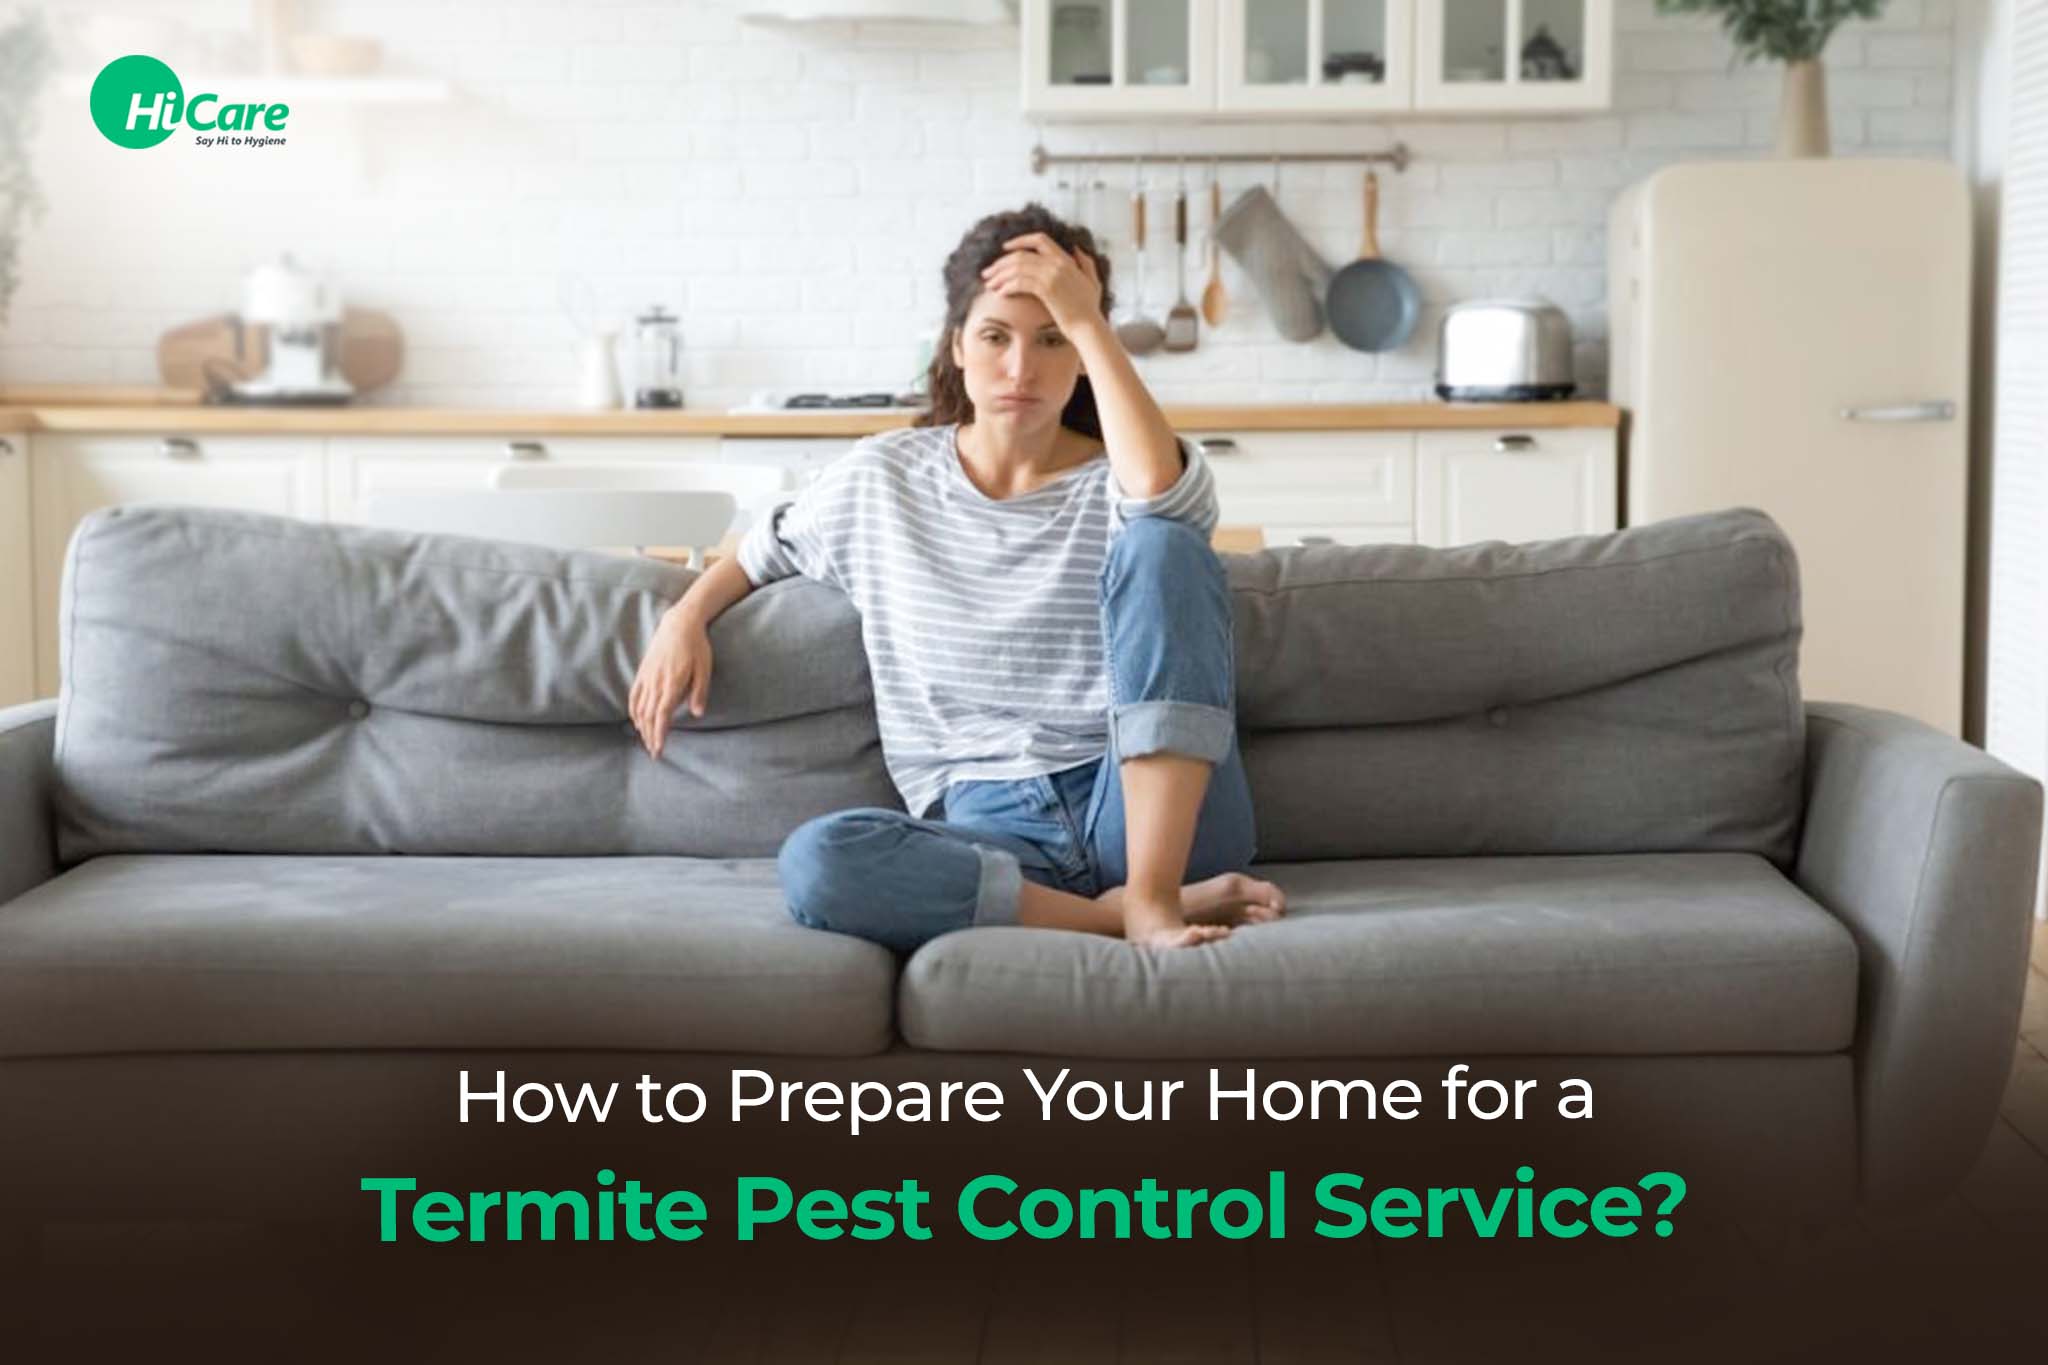 How to Prepare Your Home for a Termite Pest Control Service?